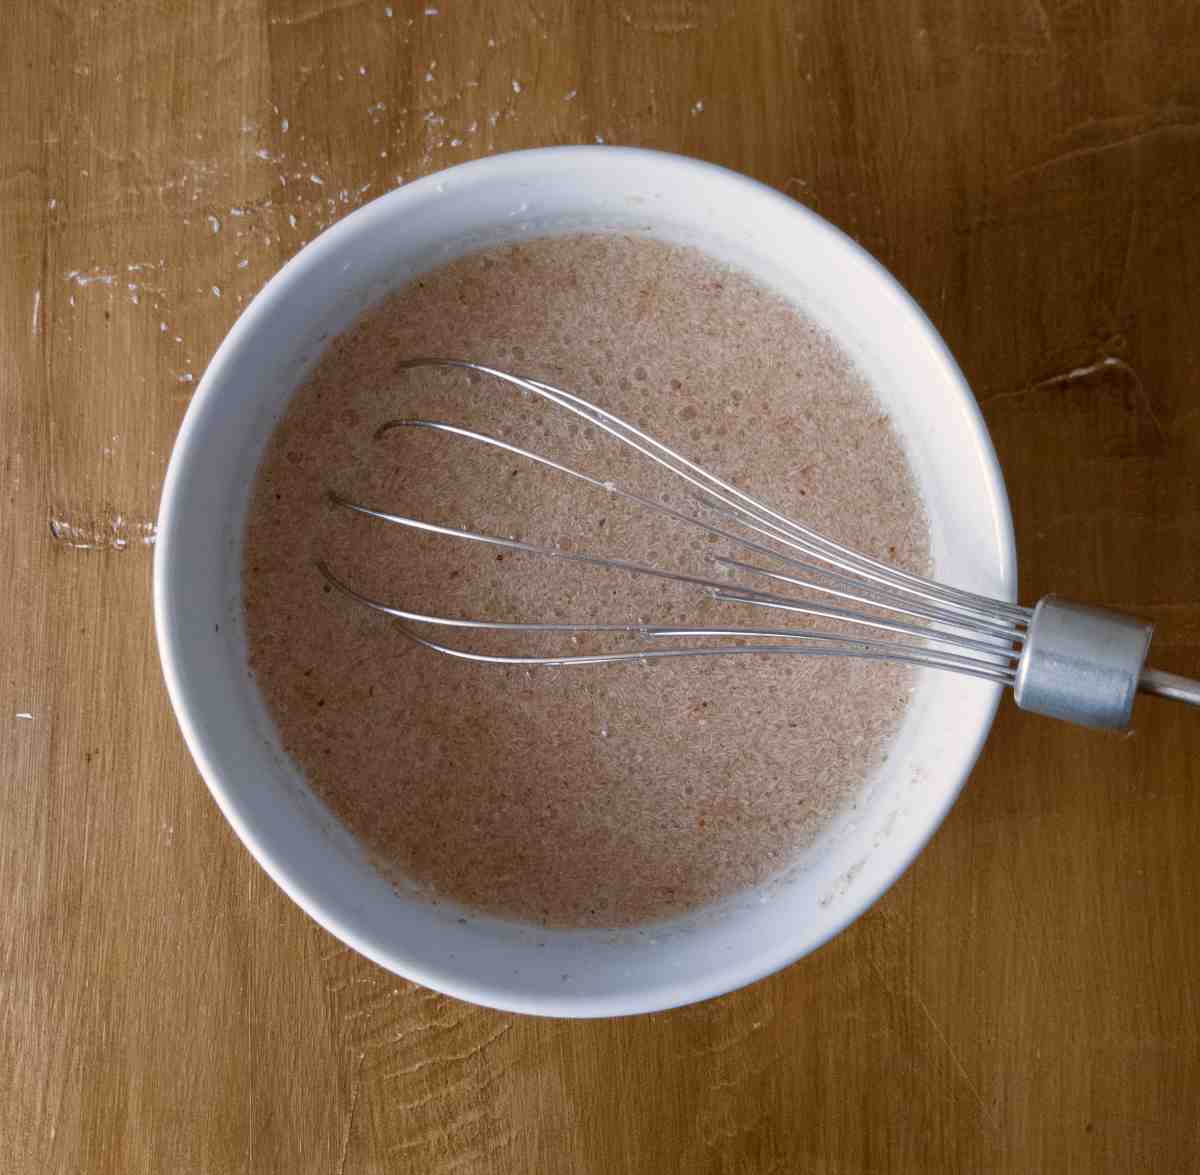 Psyllium husk mixed with water in a small bowl with a whisk.